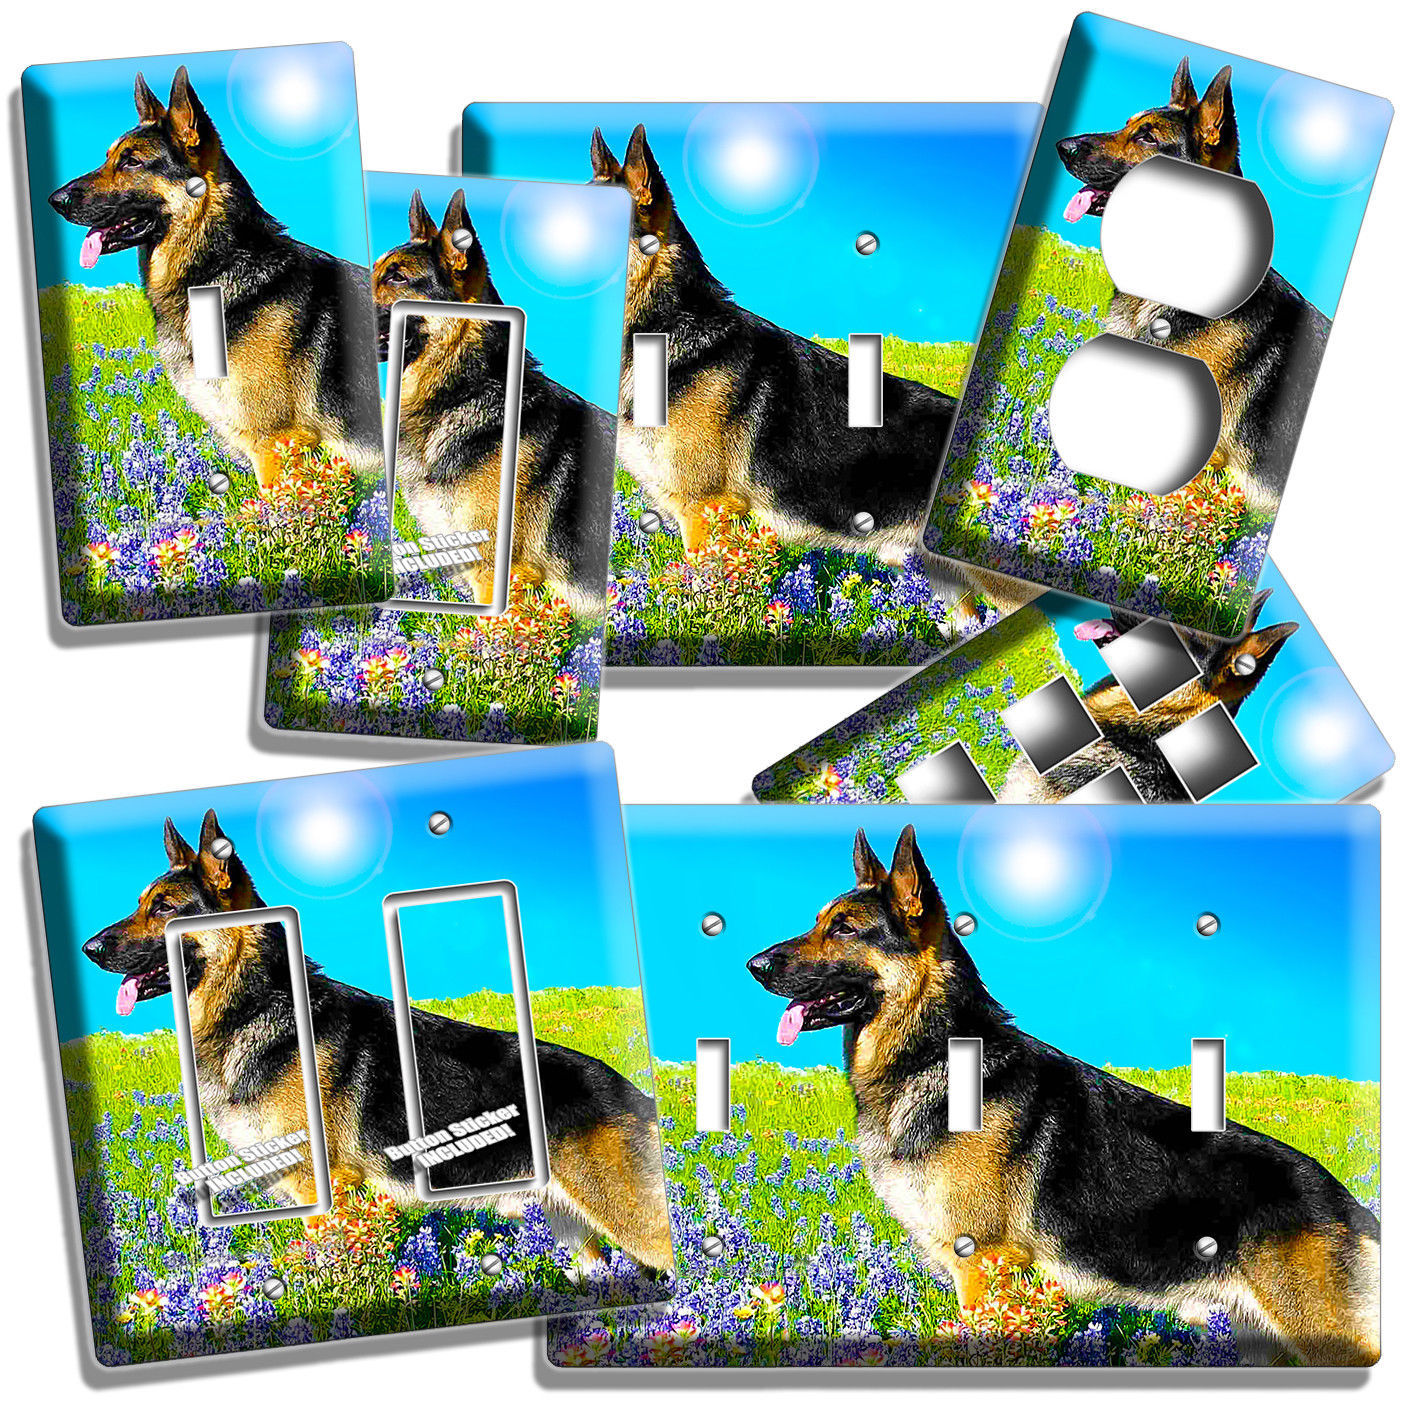 ADULT GERMAN SHEPHERD DOG FLOWER FIELD LIGHT SWITCH OUTLET WALL COVER ROOM DECOR